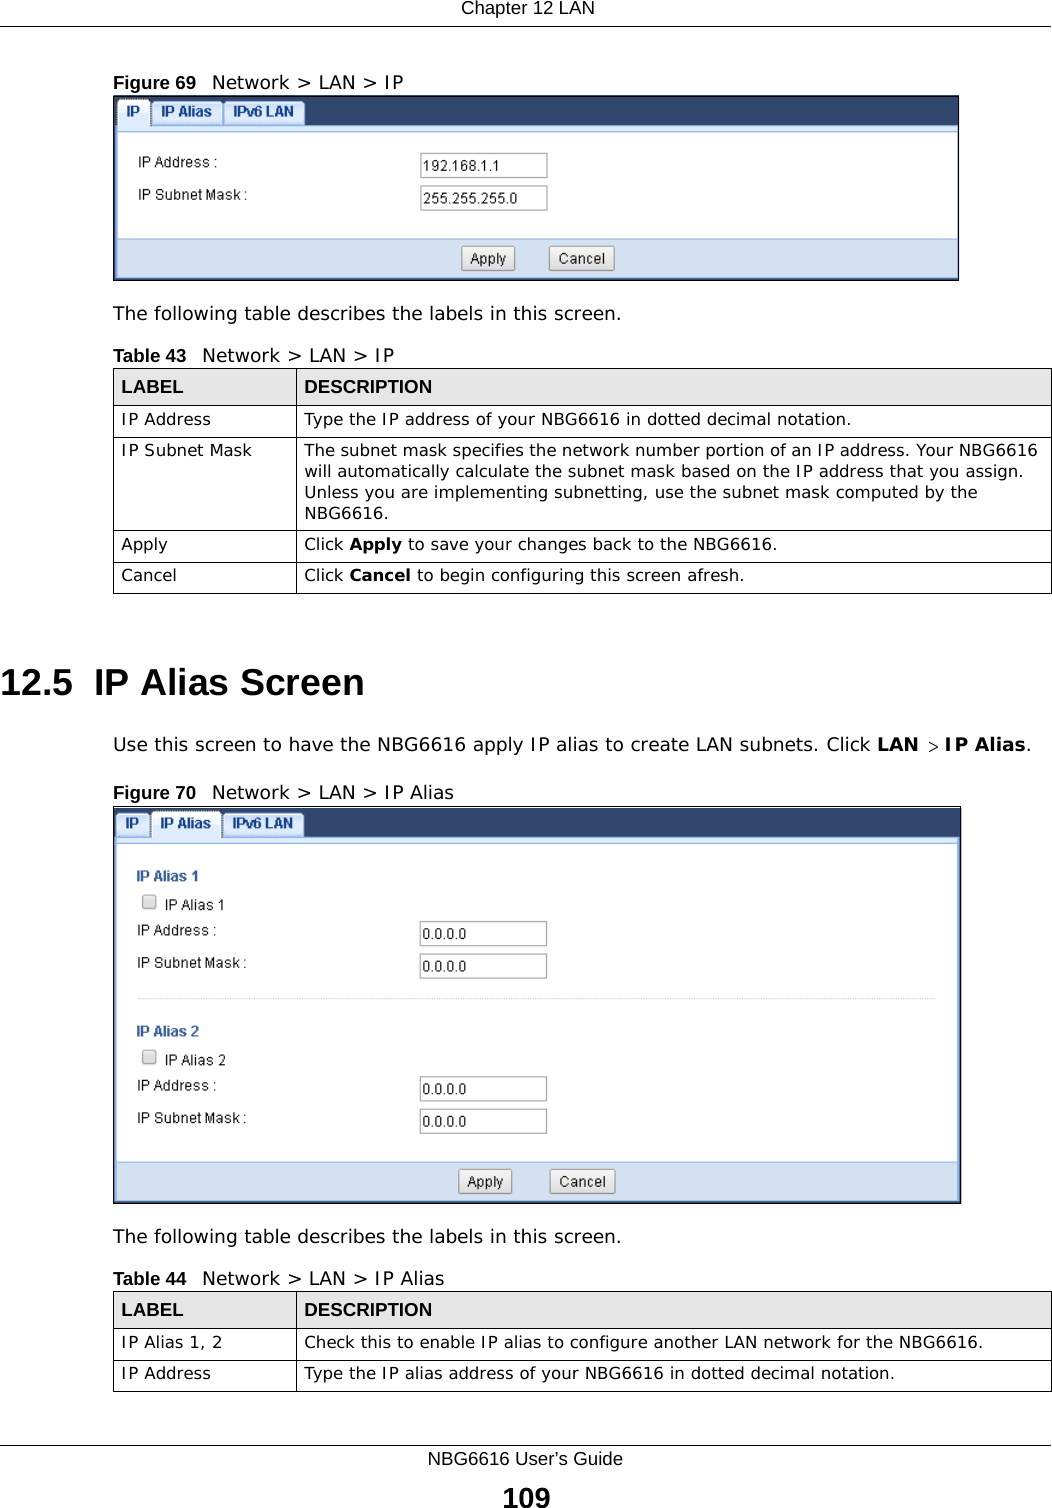  Chapter 12 LANNBG6616 User’s Guide109Figure 69   Network &gt; LAN &gt; IP The following table describes the labels in this screen.12.5  IP Alias ScreenUse this screen to have the NBG6616 apply IP alias to create LAN subnets. Click LAN &gt; IP Alias.Figure 70   Network &gt; LAN &gt; IP Alias The following table describes the labels in this screen.Table 43   Network &gt; LAN &gt; IPLABEL DESCRIPTIONIP Address Type the IP address of your NBG6616 in dotted decimal notation.IP Subnet Mask The subnet mask specifies the network number portion of an IP address. Your NBG6616 will automatically calculate the subnet mask based on the IP address that you assign. Unless you are implementing subnetting, use the subnet mask computed by the NBG6616.Apply Click Apply to save your changes back to the NBG6616.Cancel Click Cancel to begin configuring this screen afresh.Table 44   Network &gt; LAN &gt; IP AliasLABEL DESCRIPTIONIP Alias 1, 2 Check this to enable IP alias to configure another LAN network for the NBG6616.IP Address Type the IP alias address of your NBG6616 in dotted decimal notation.